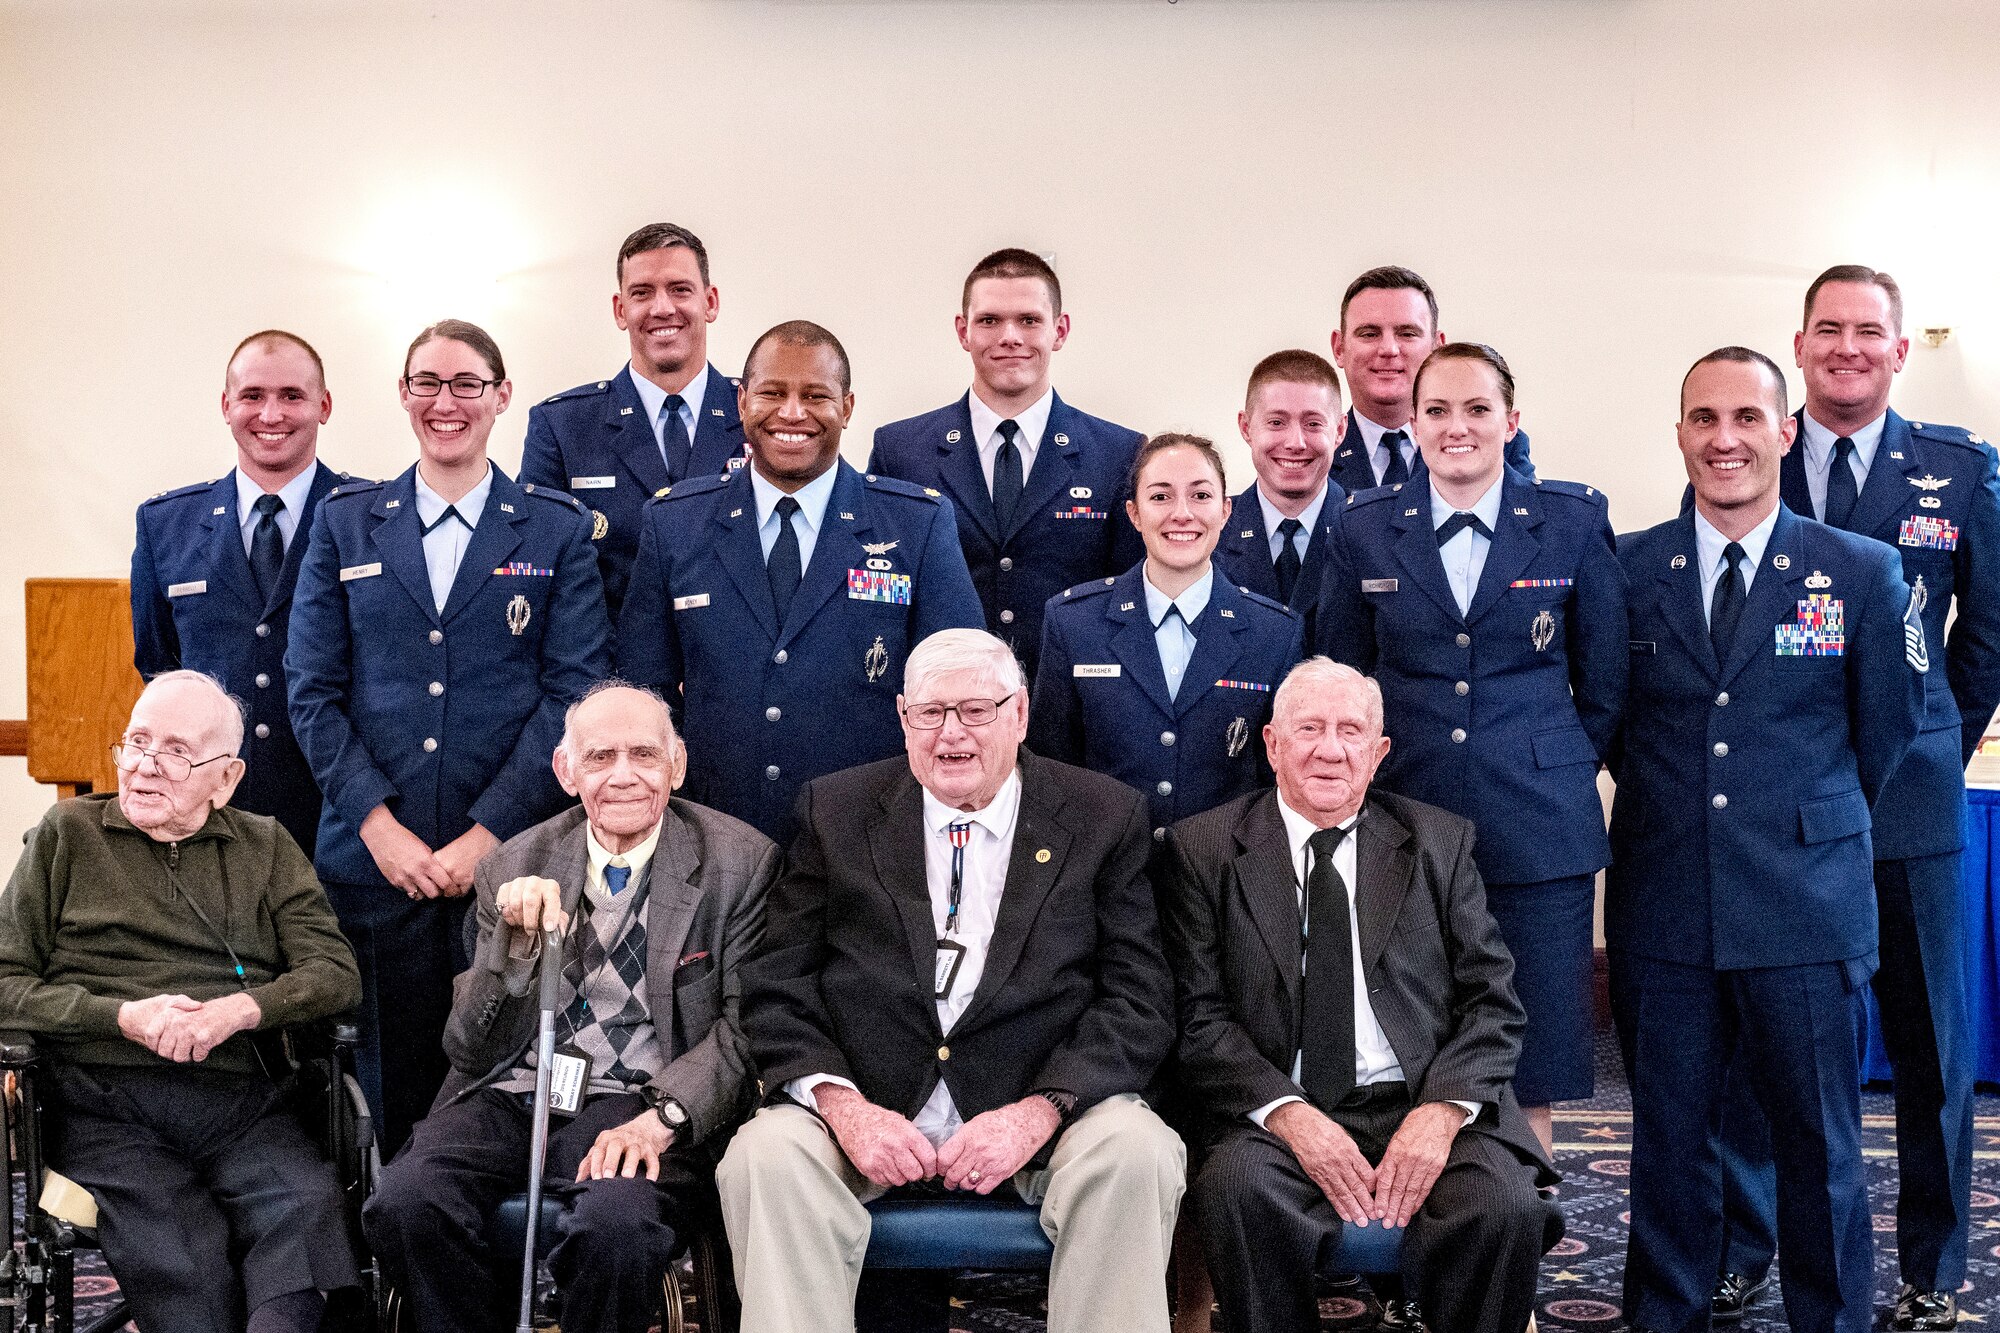 This group photo was taken October 13, 2018 in the officers' lounge at Joint Base Andrews, Maryland, to mark the reunion of the 490th of yesterday and today. From left to right starting in the back are Capt. Tony Ferrelli, Lt. Ariana Henry, Lt. Mitch Nairn, Maj. Chris Boney, Senior Airman Todd Conley, Lt. Kyla Thrasher, Capt. Ryan Potts, Maj. Marc Keller, Lt. Kinsey Richmond, Master Sgt. Matthew Manning, Lt. Col. Troy Stauter. The front row from left to right are retired Maj. Charles Good, retired Staff Sgt. Murry Schenker, Joe Barrett and Tom Bristol. (Photo courtesy Capt. Tony Ferrelli)